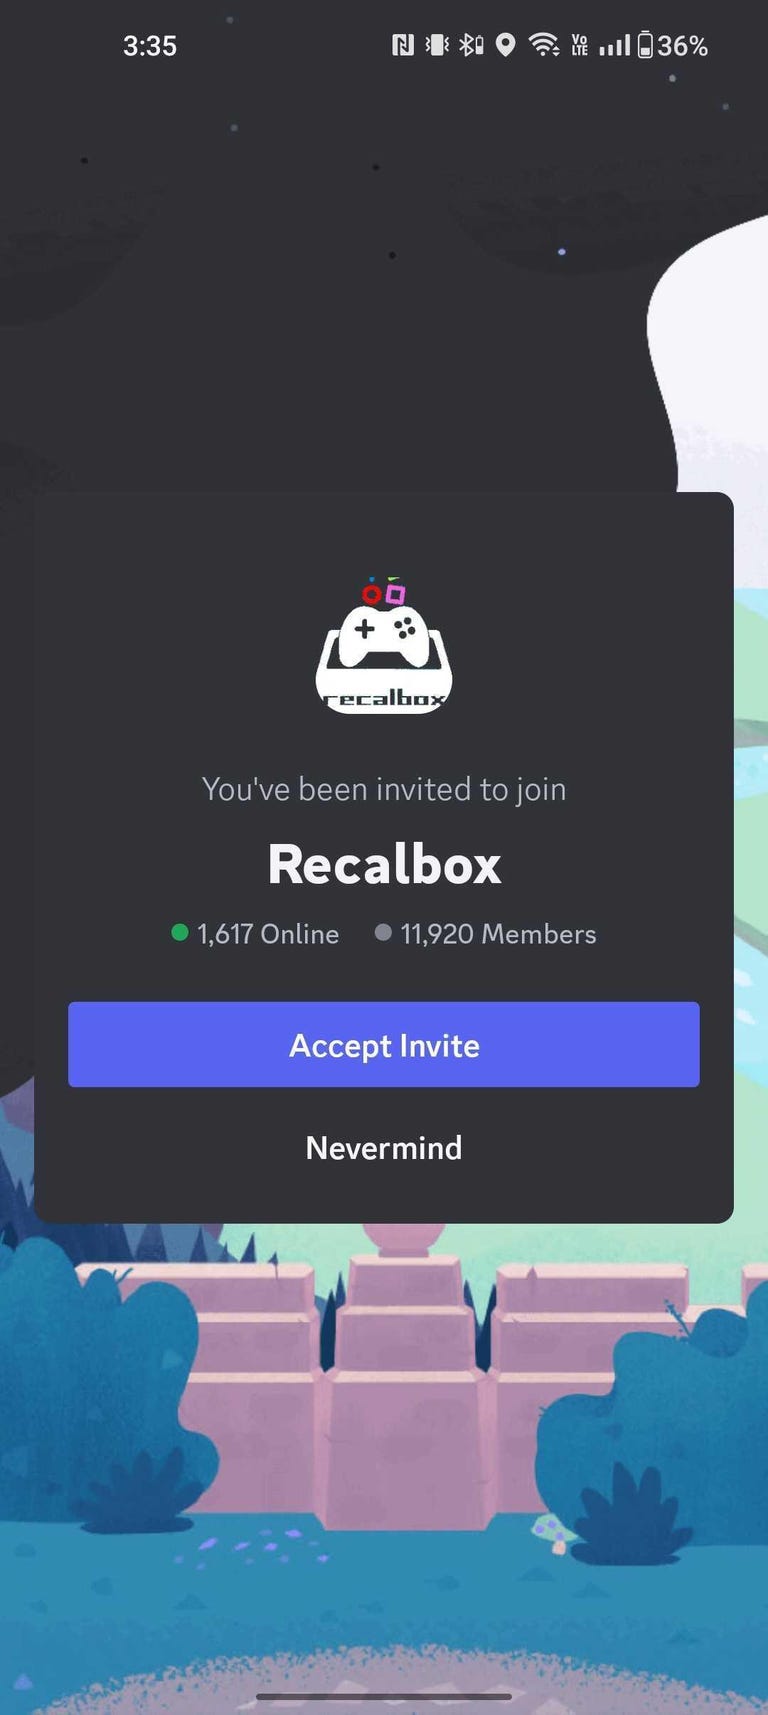 How do I join a Server? – Discord